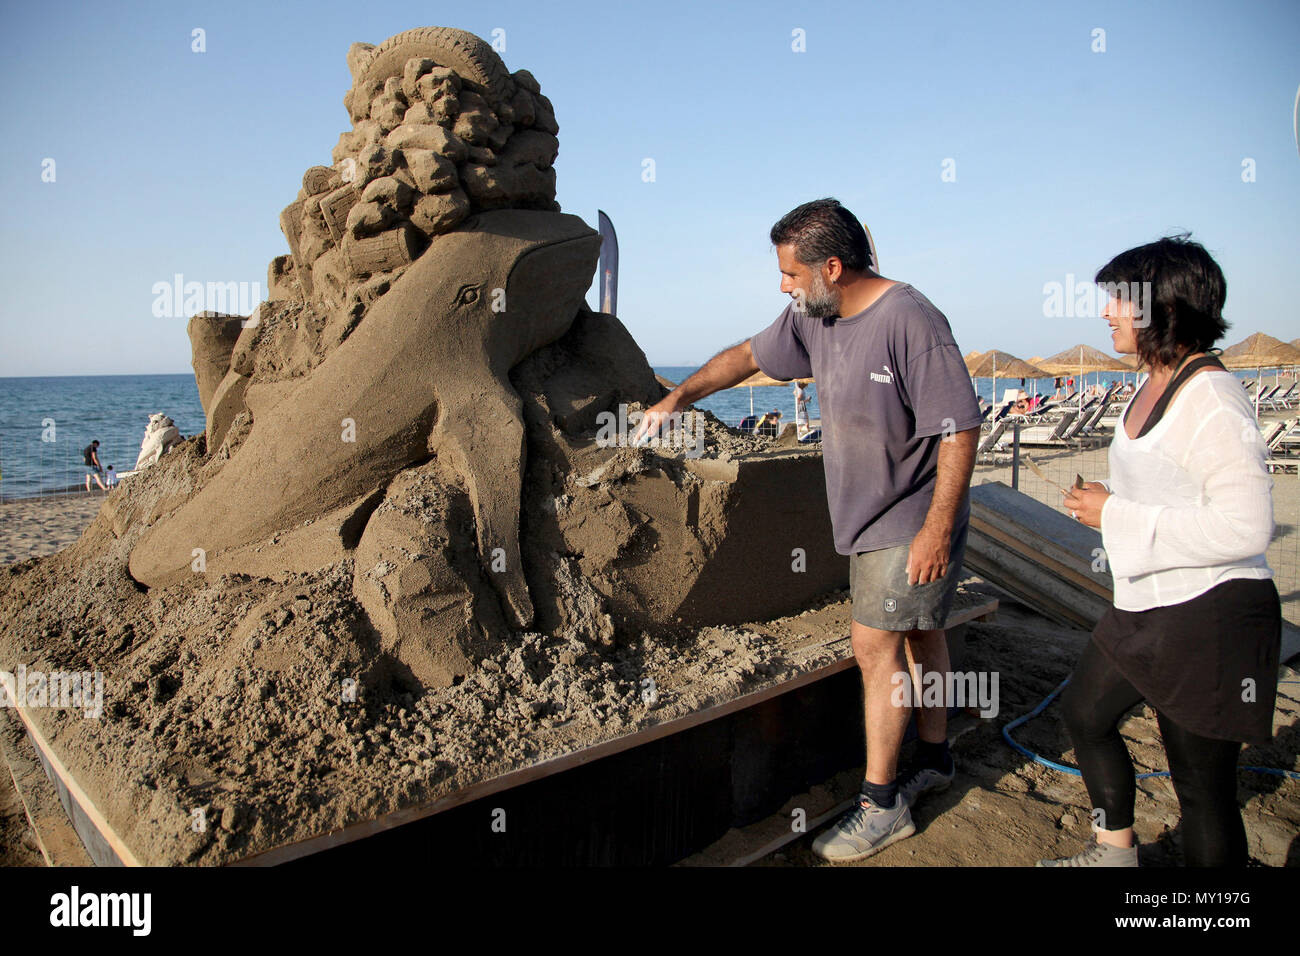 Heraklion, Greece. 5th June, 2018. Greek sculptors Andreas Arapakis (L) and Amalia Florou work at Ammoudara beach, Heraklion, Greece, June 5, 2018. Ammoudara Professional Sand Sculpting Festival is held here to raise public awareness on plastic pollution. Credit: Stefanos Rapanis/Xinhua/Alamy Live News Stock Photo